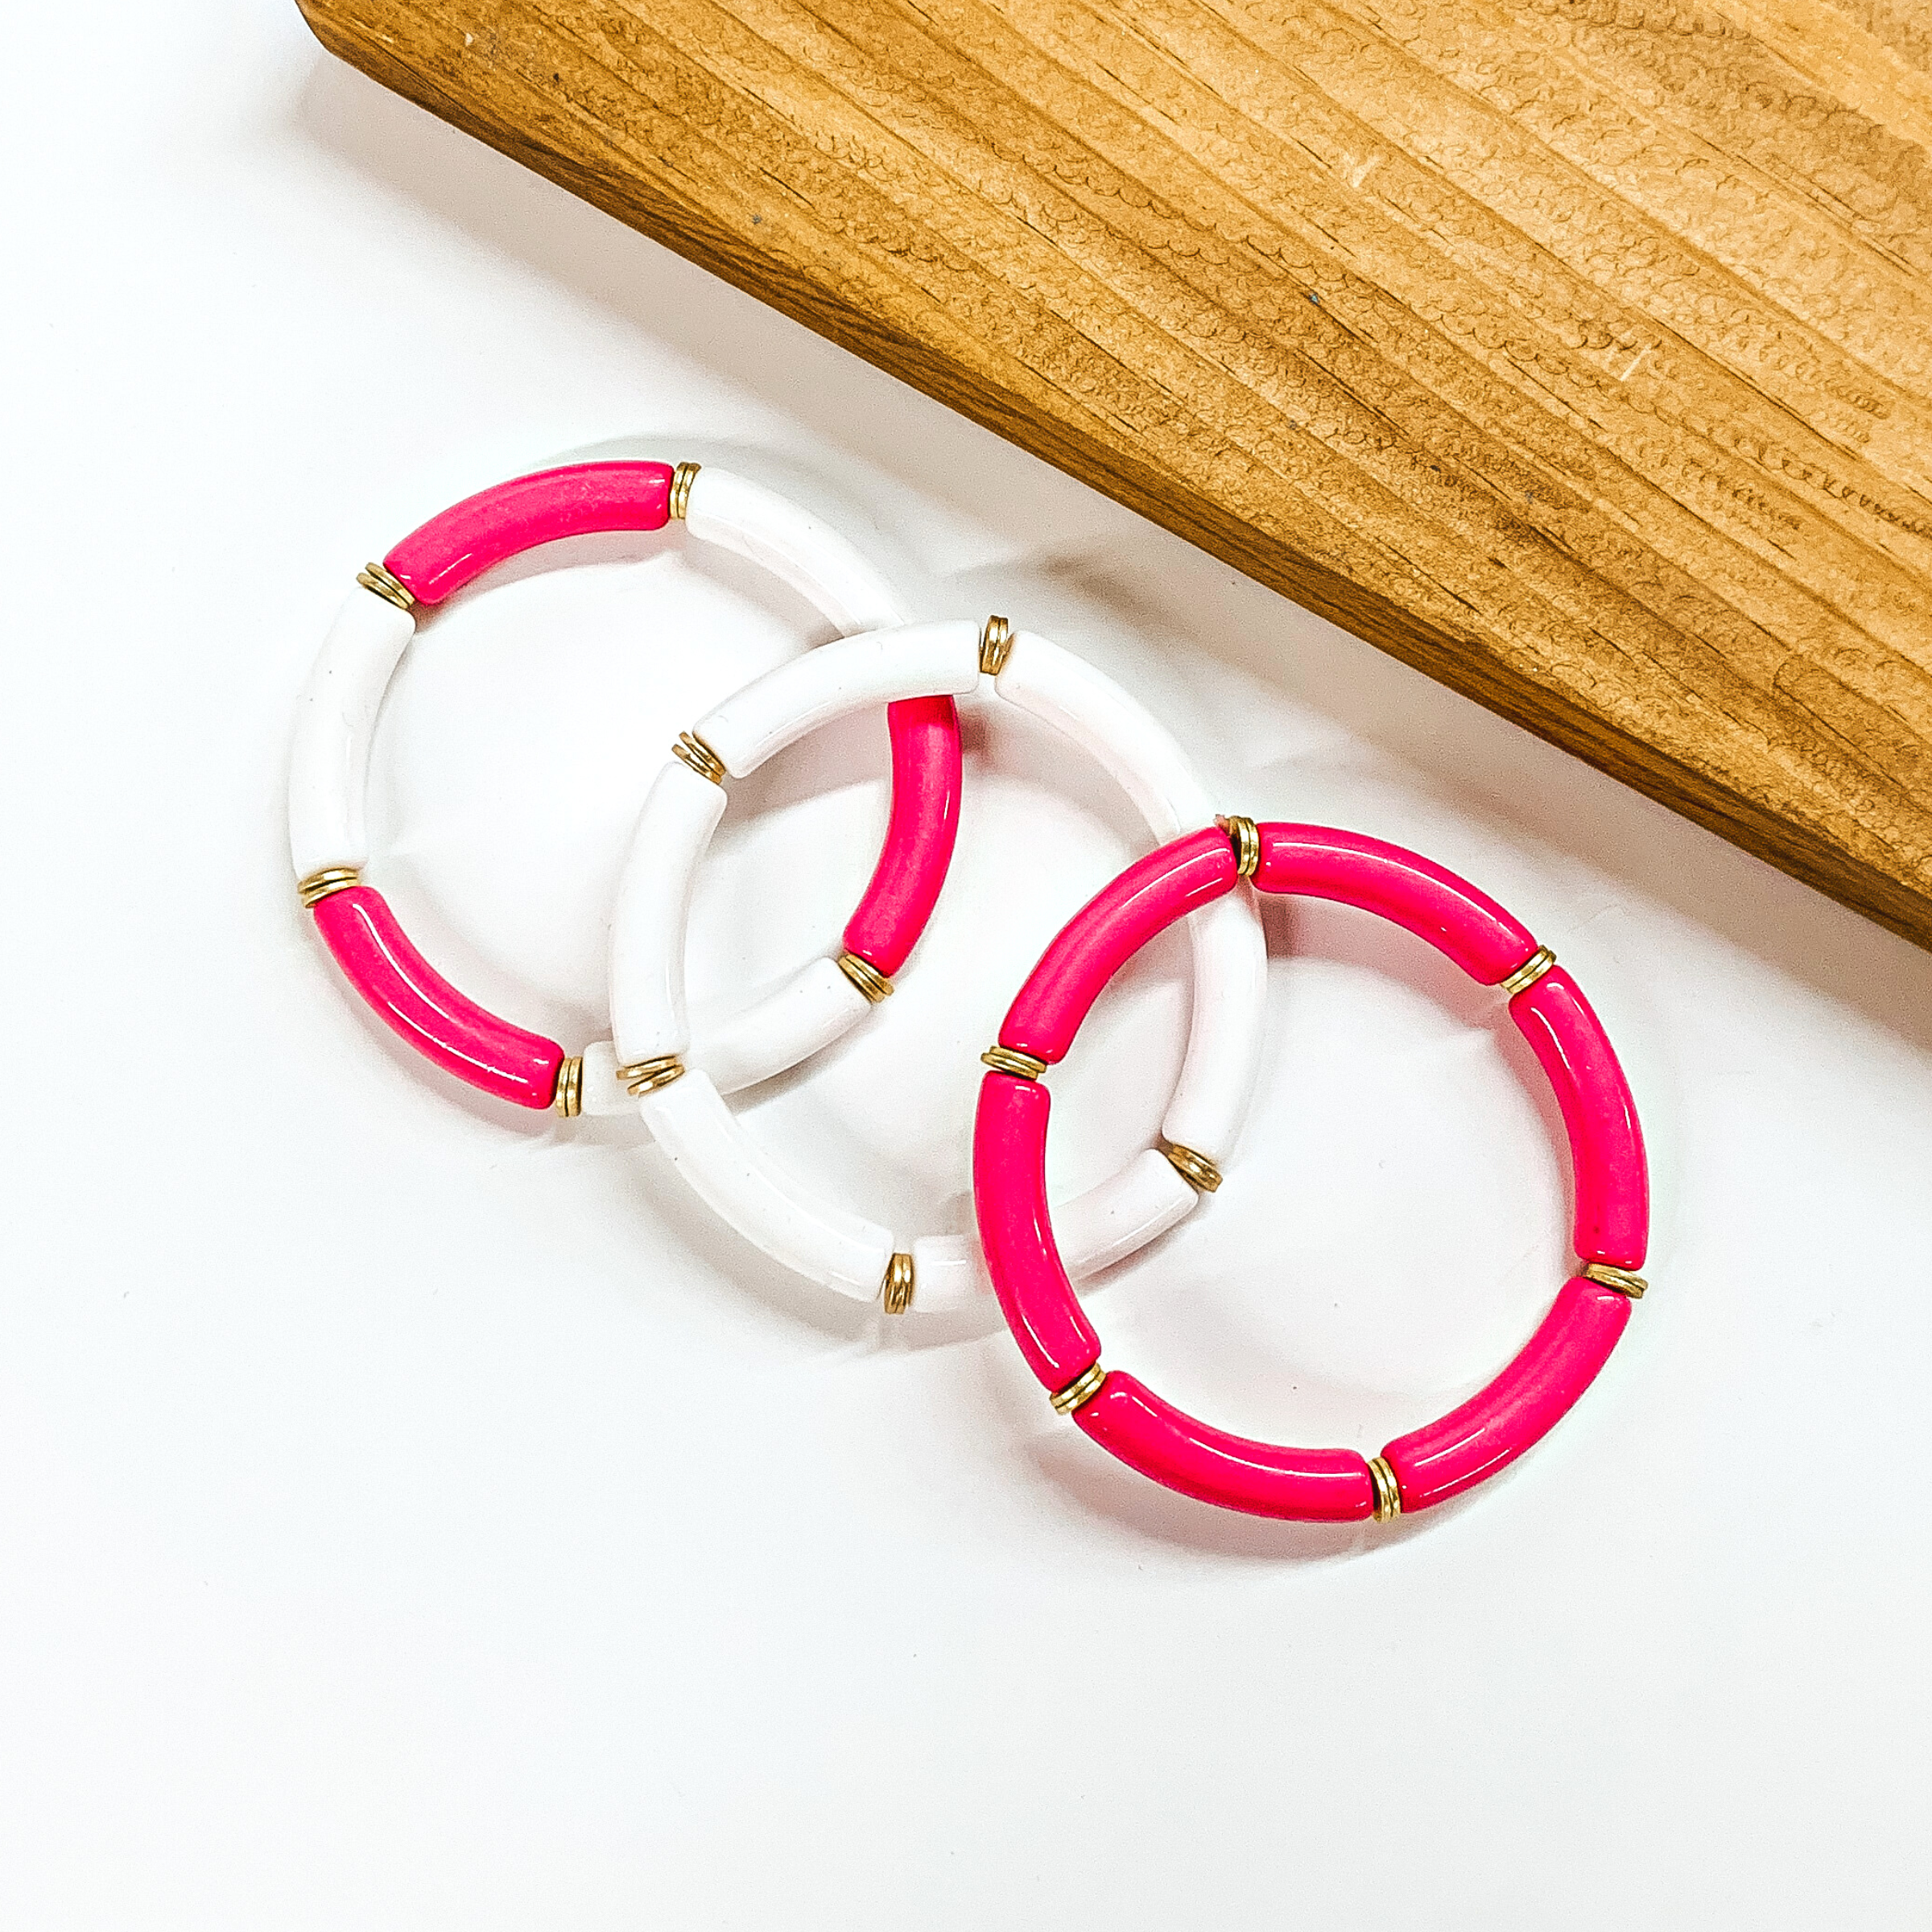 This is a set of three tube bracelets in white and hot pink with gold spacers. From left to bottom; hot pink and white tubes, white tubes, hot pink tubes. This bracelet set is taken on a white background with a slab of wood in the back as decor.